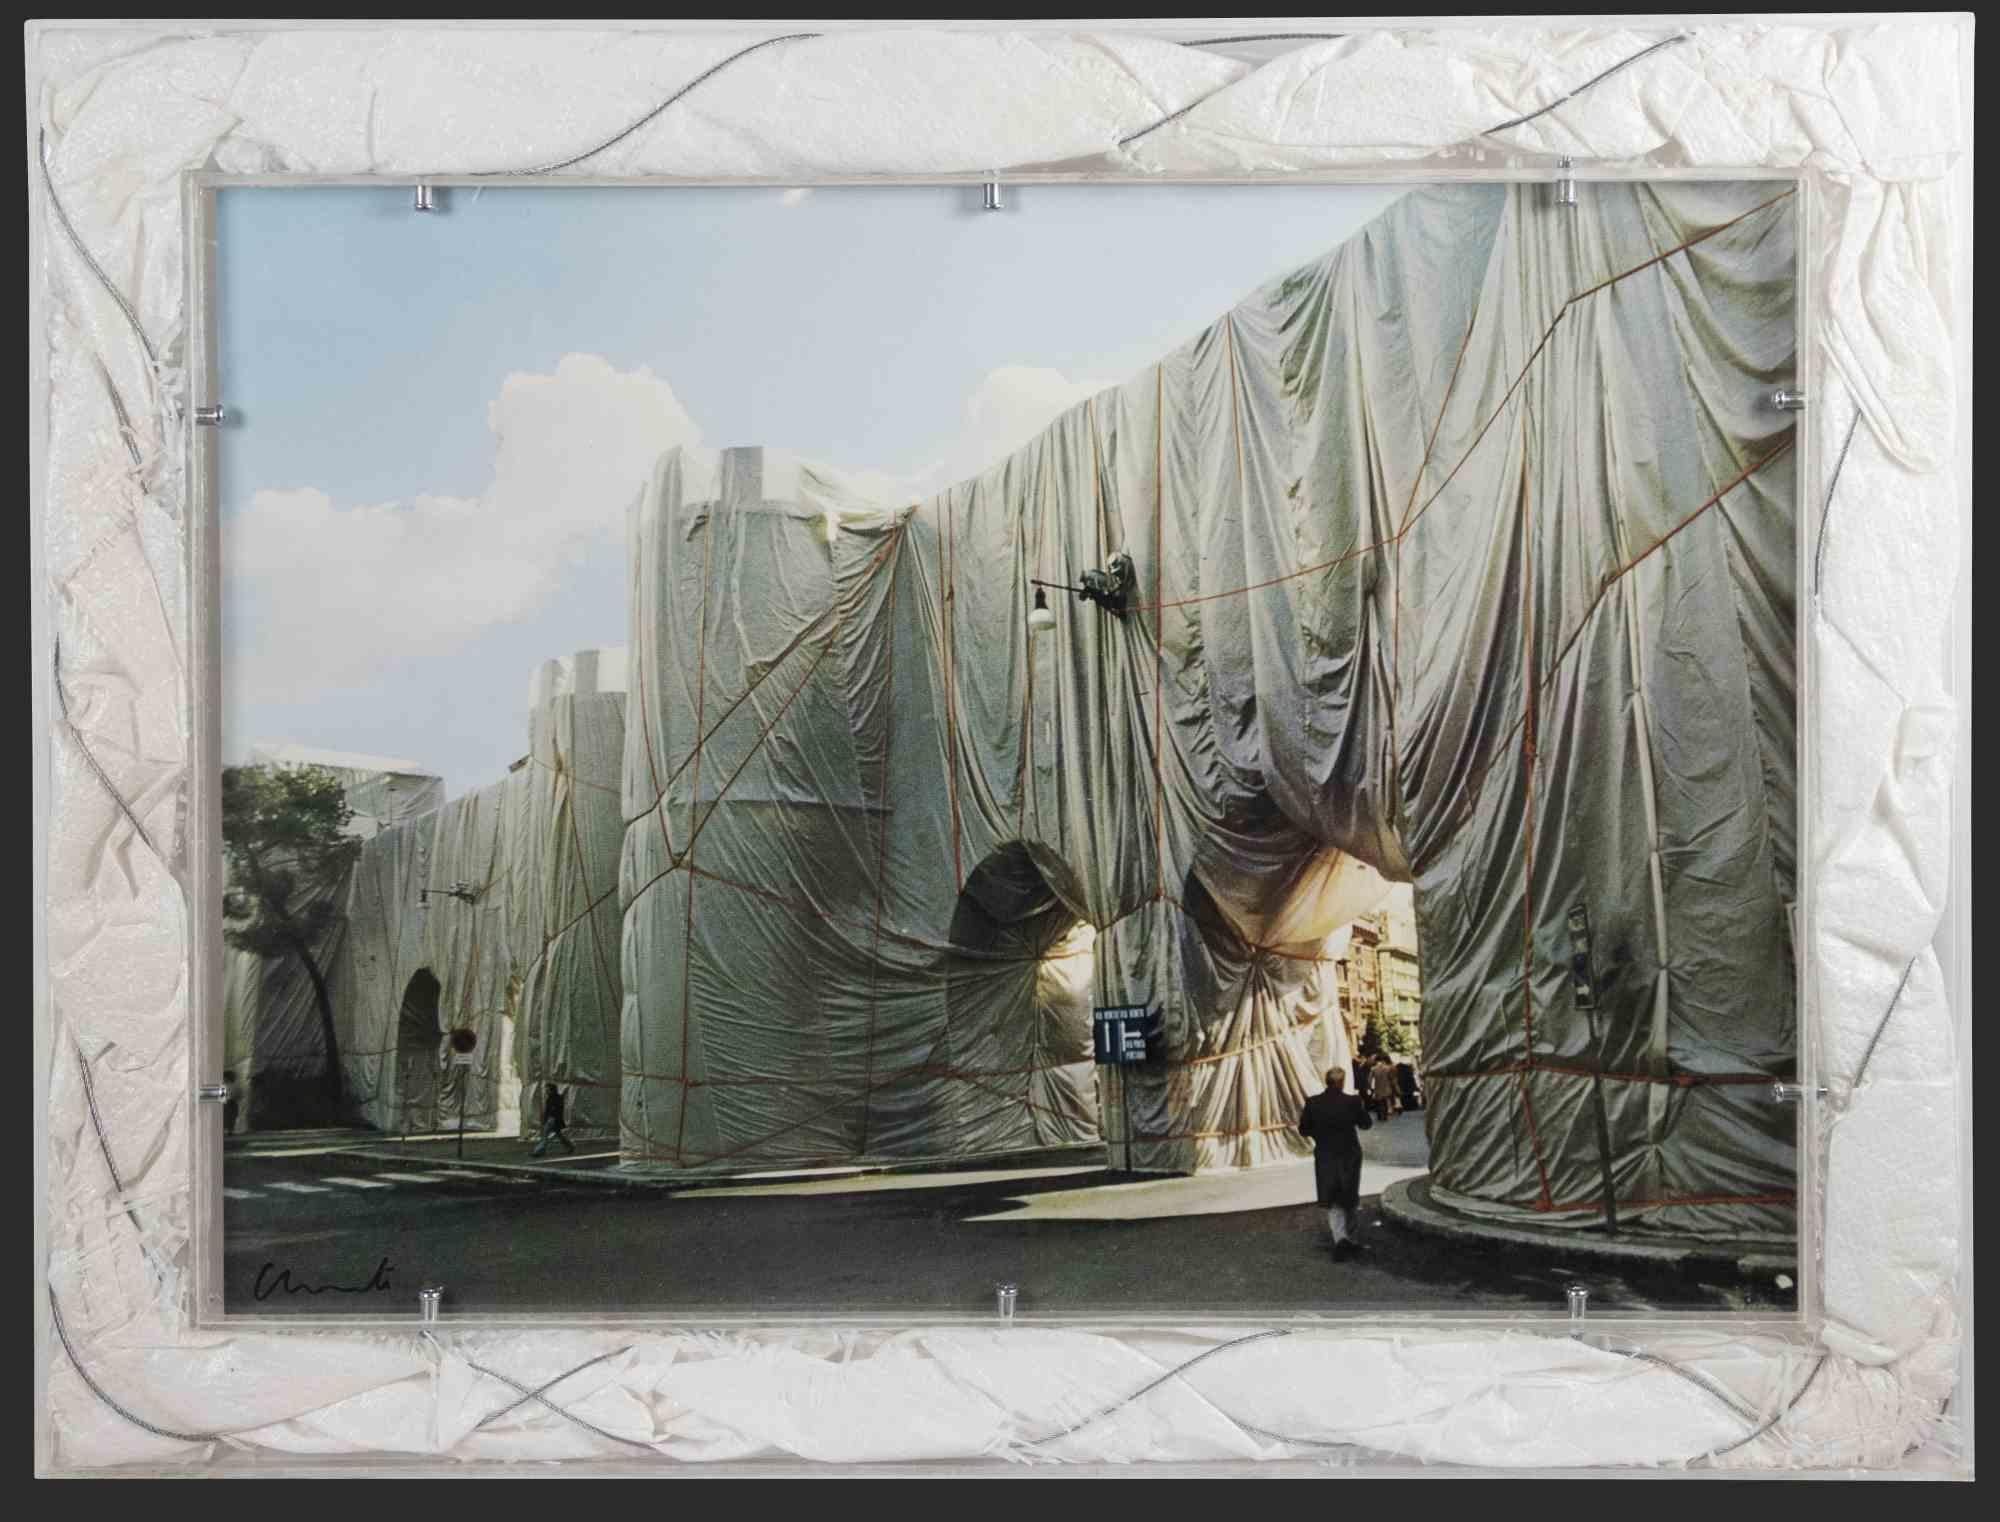 Wrapped Roman Wall - Photolithograph by Christo - 1974 ca.